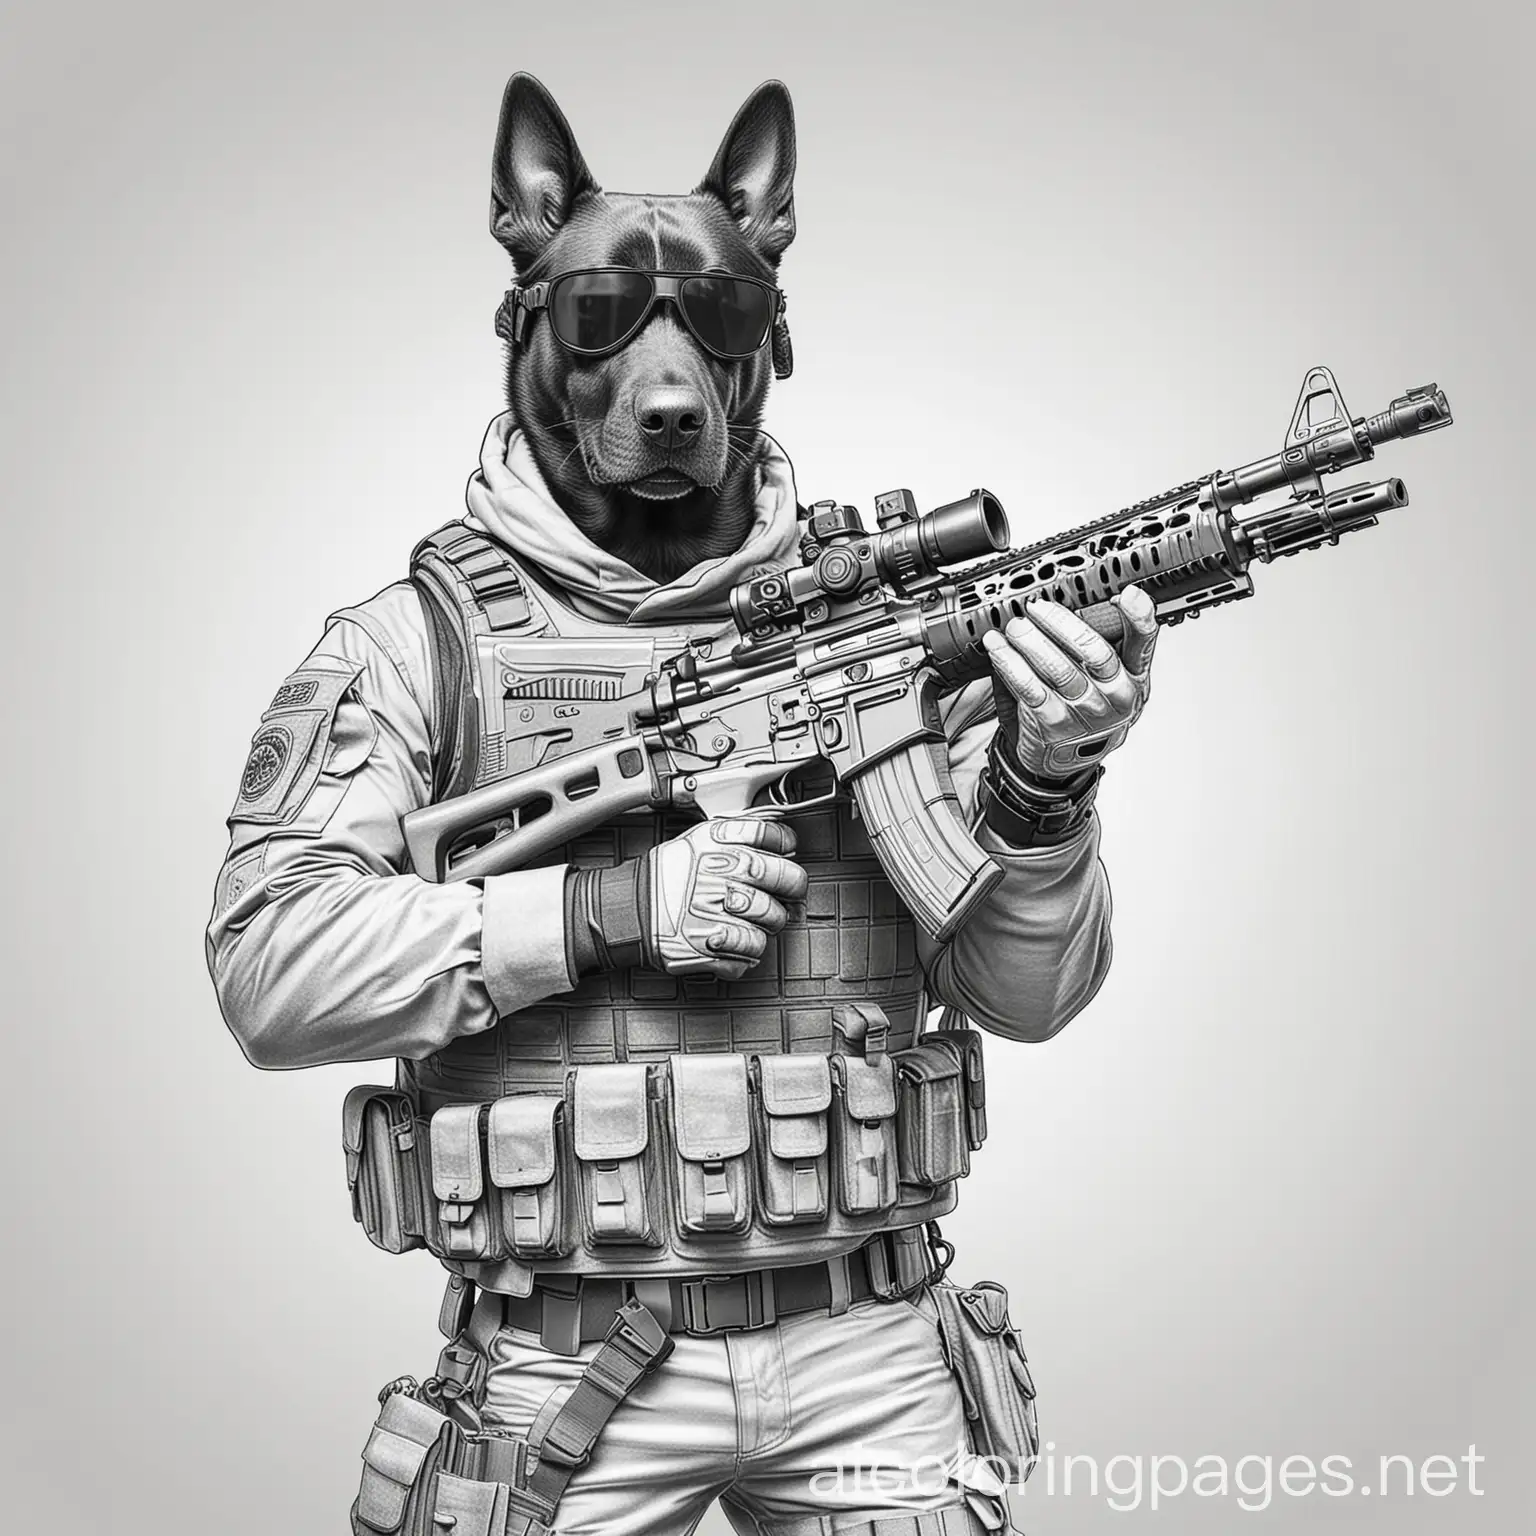 Police-Dog-with-Large-Gun-Coloring-Page